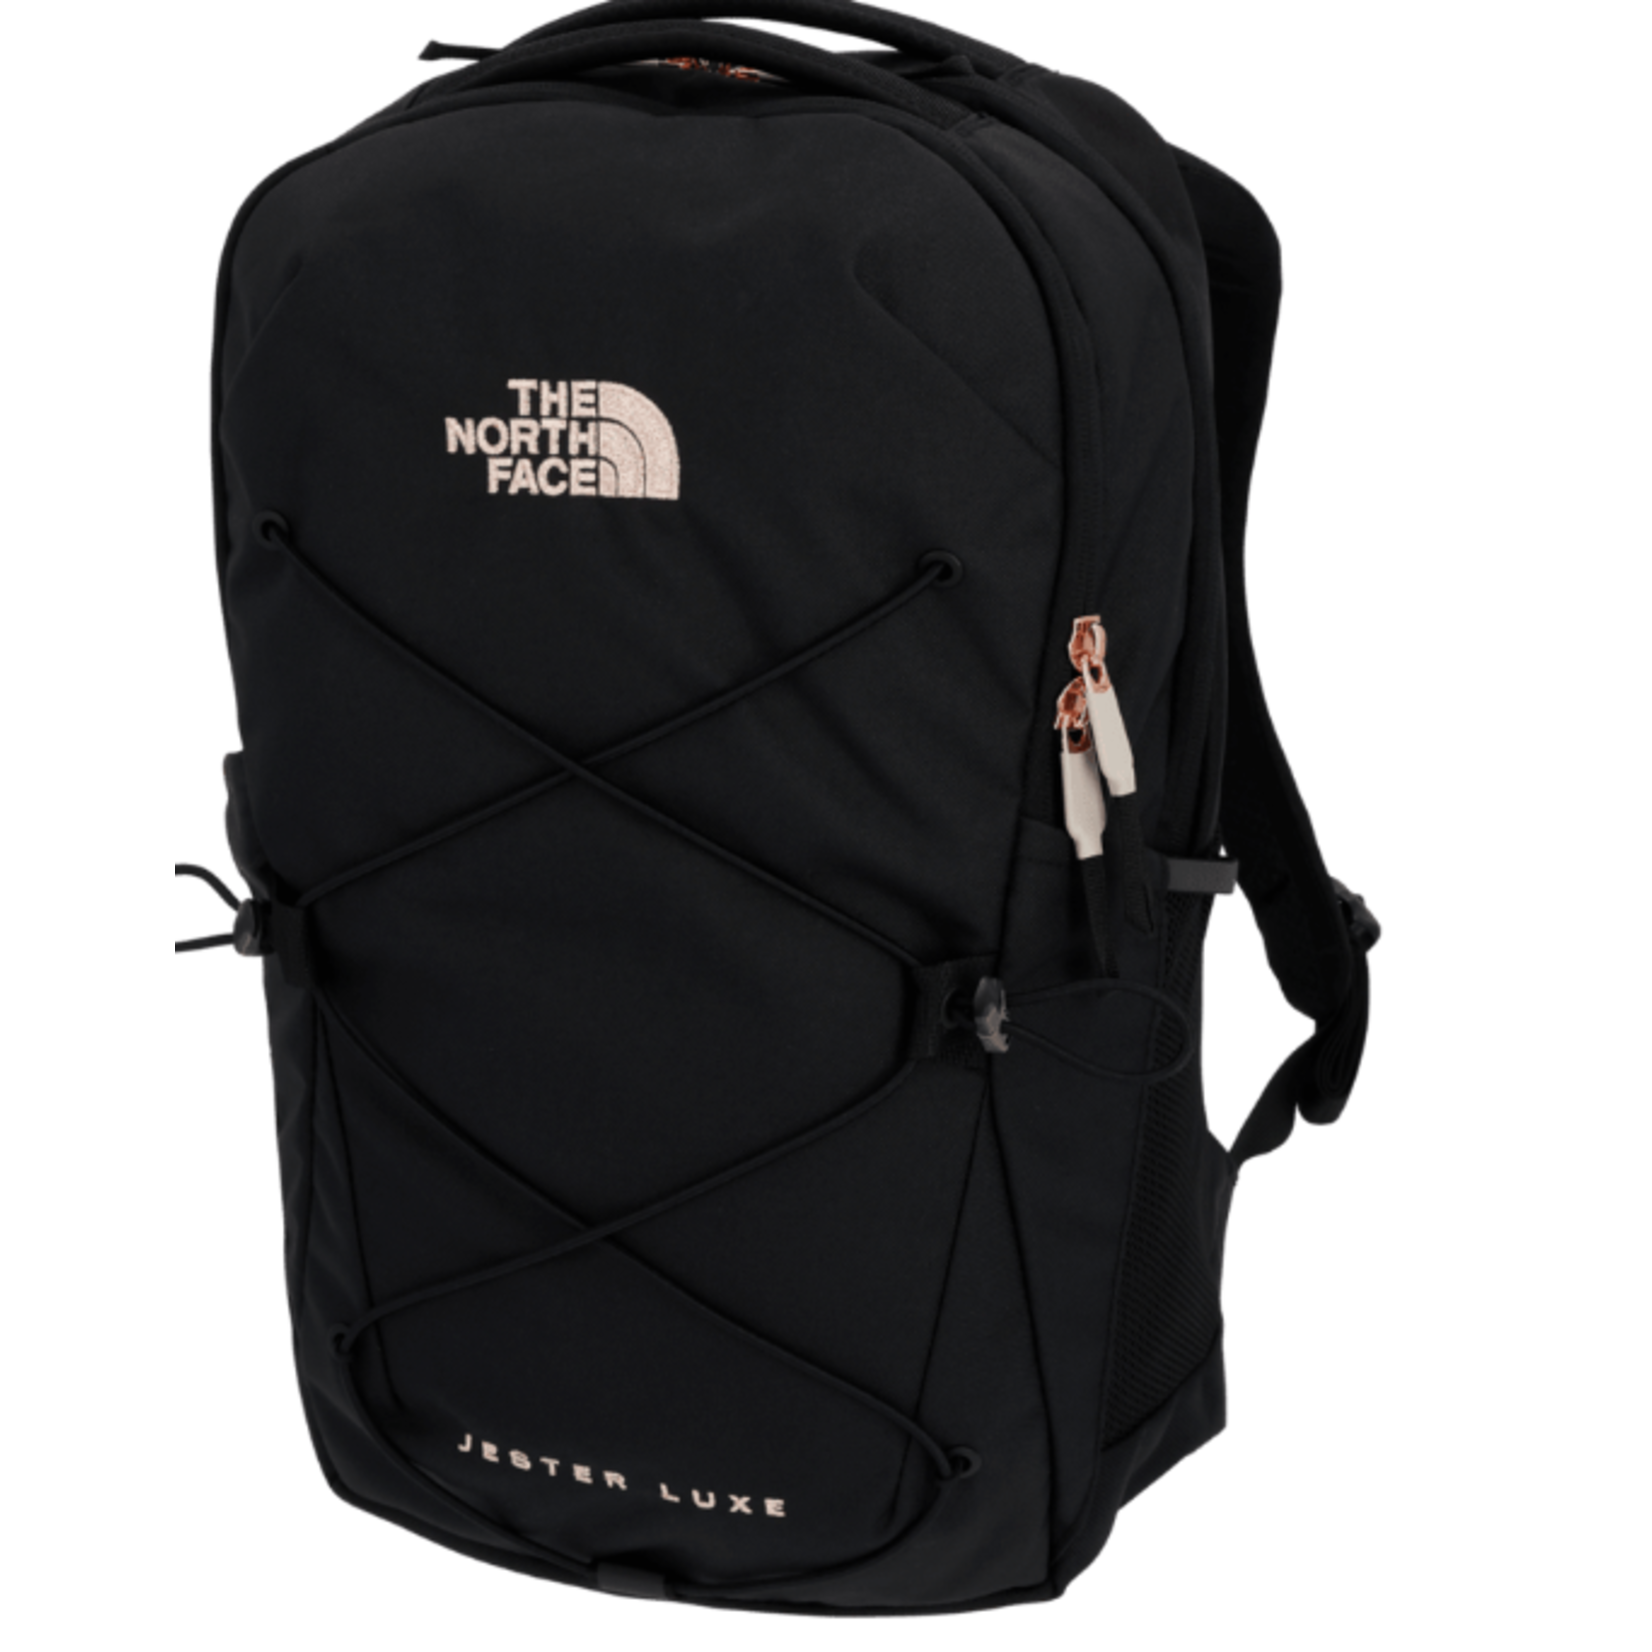 THE NORTH FACE Women's Jester Luxe